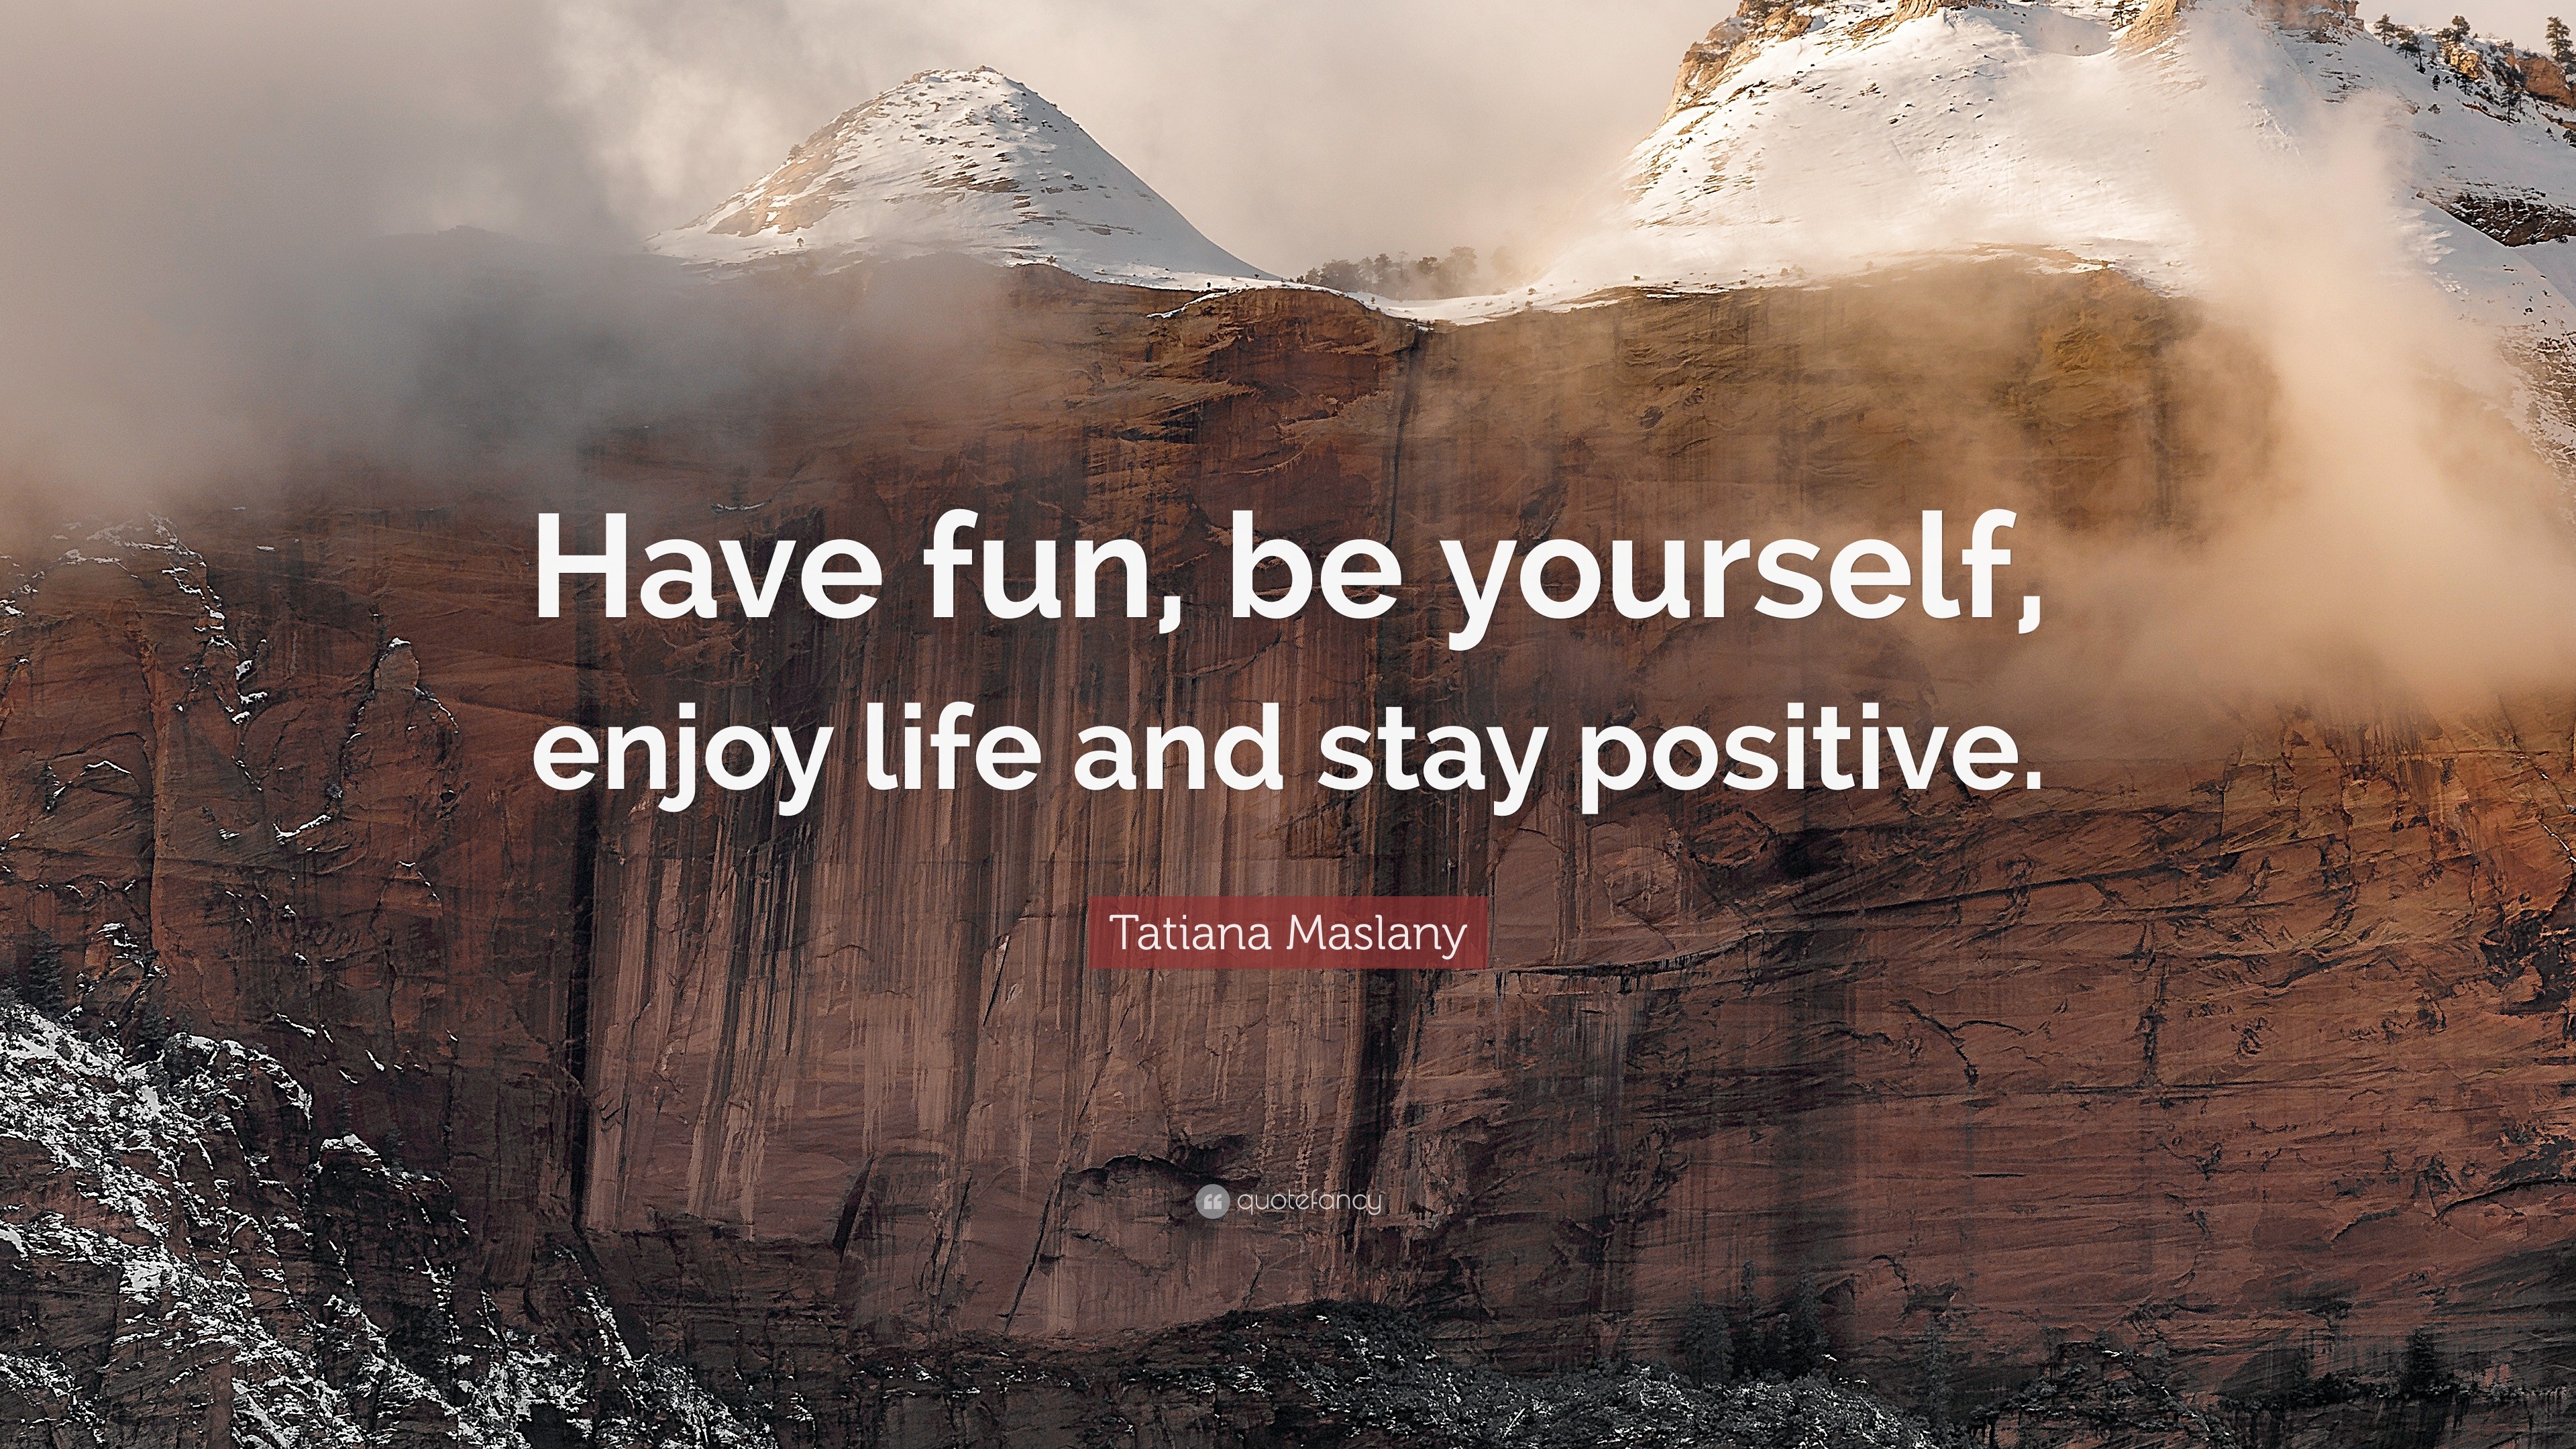 Tatiana Maslany Quote “Have fun be yourself enjoy life and stay positive